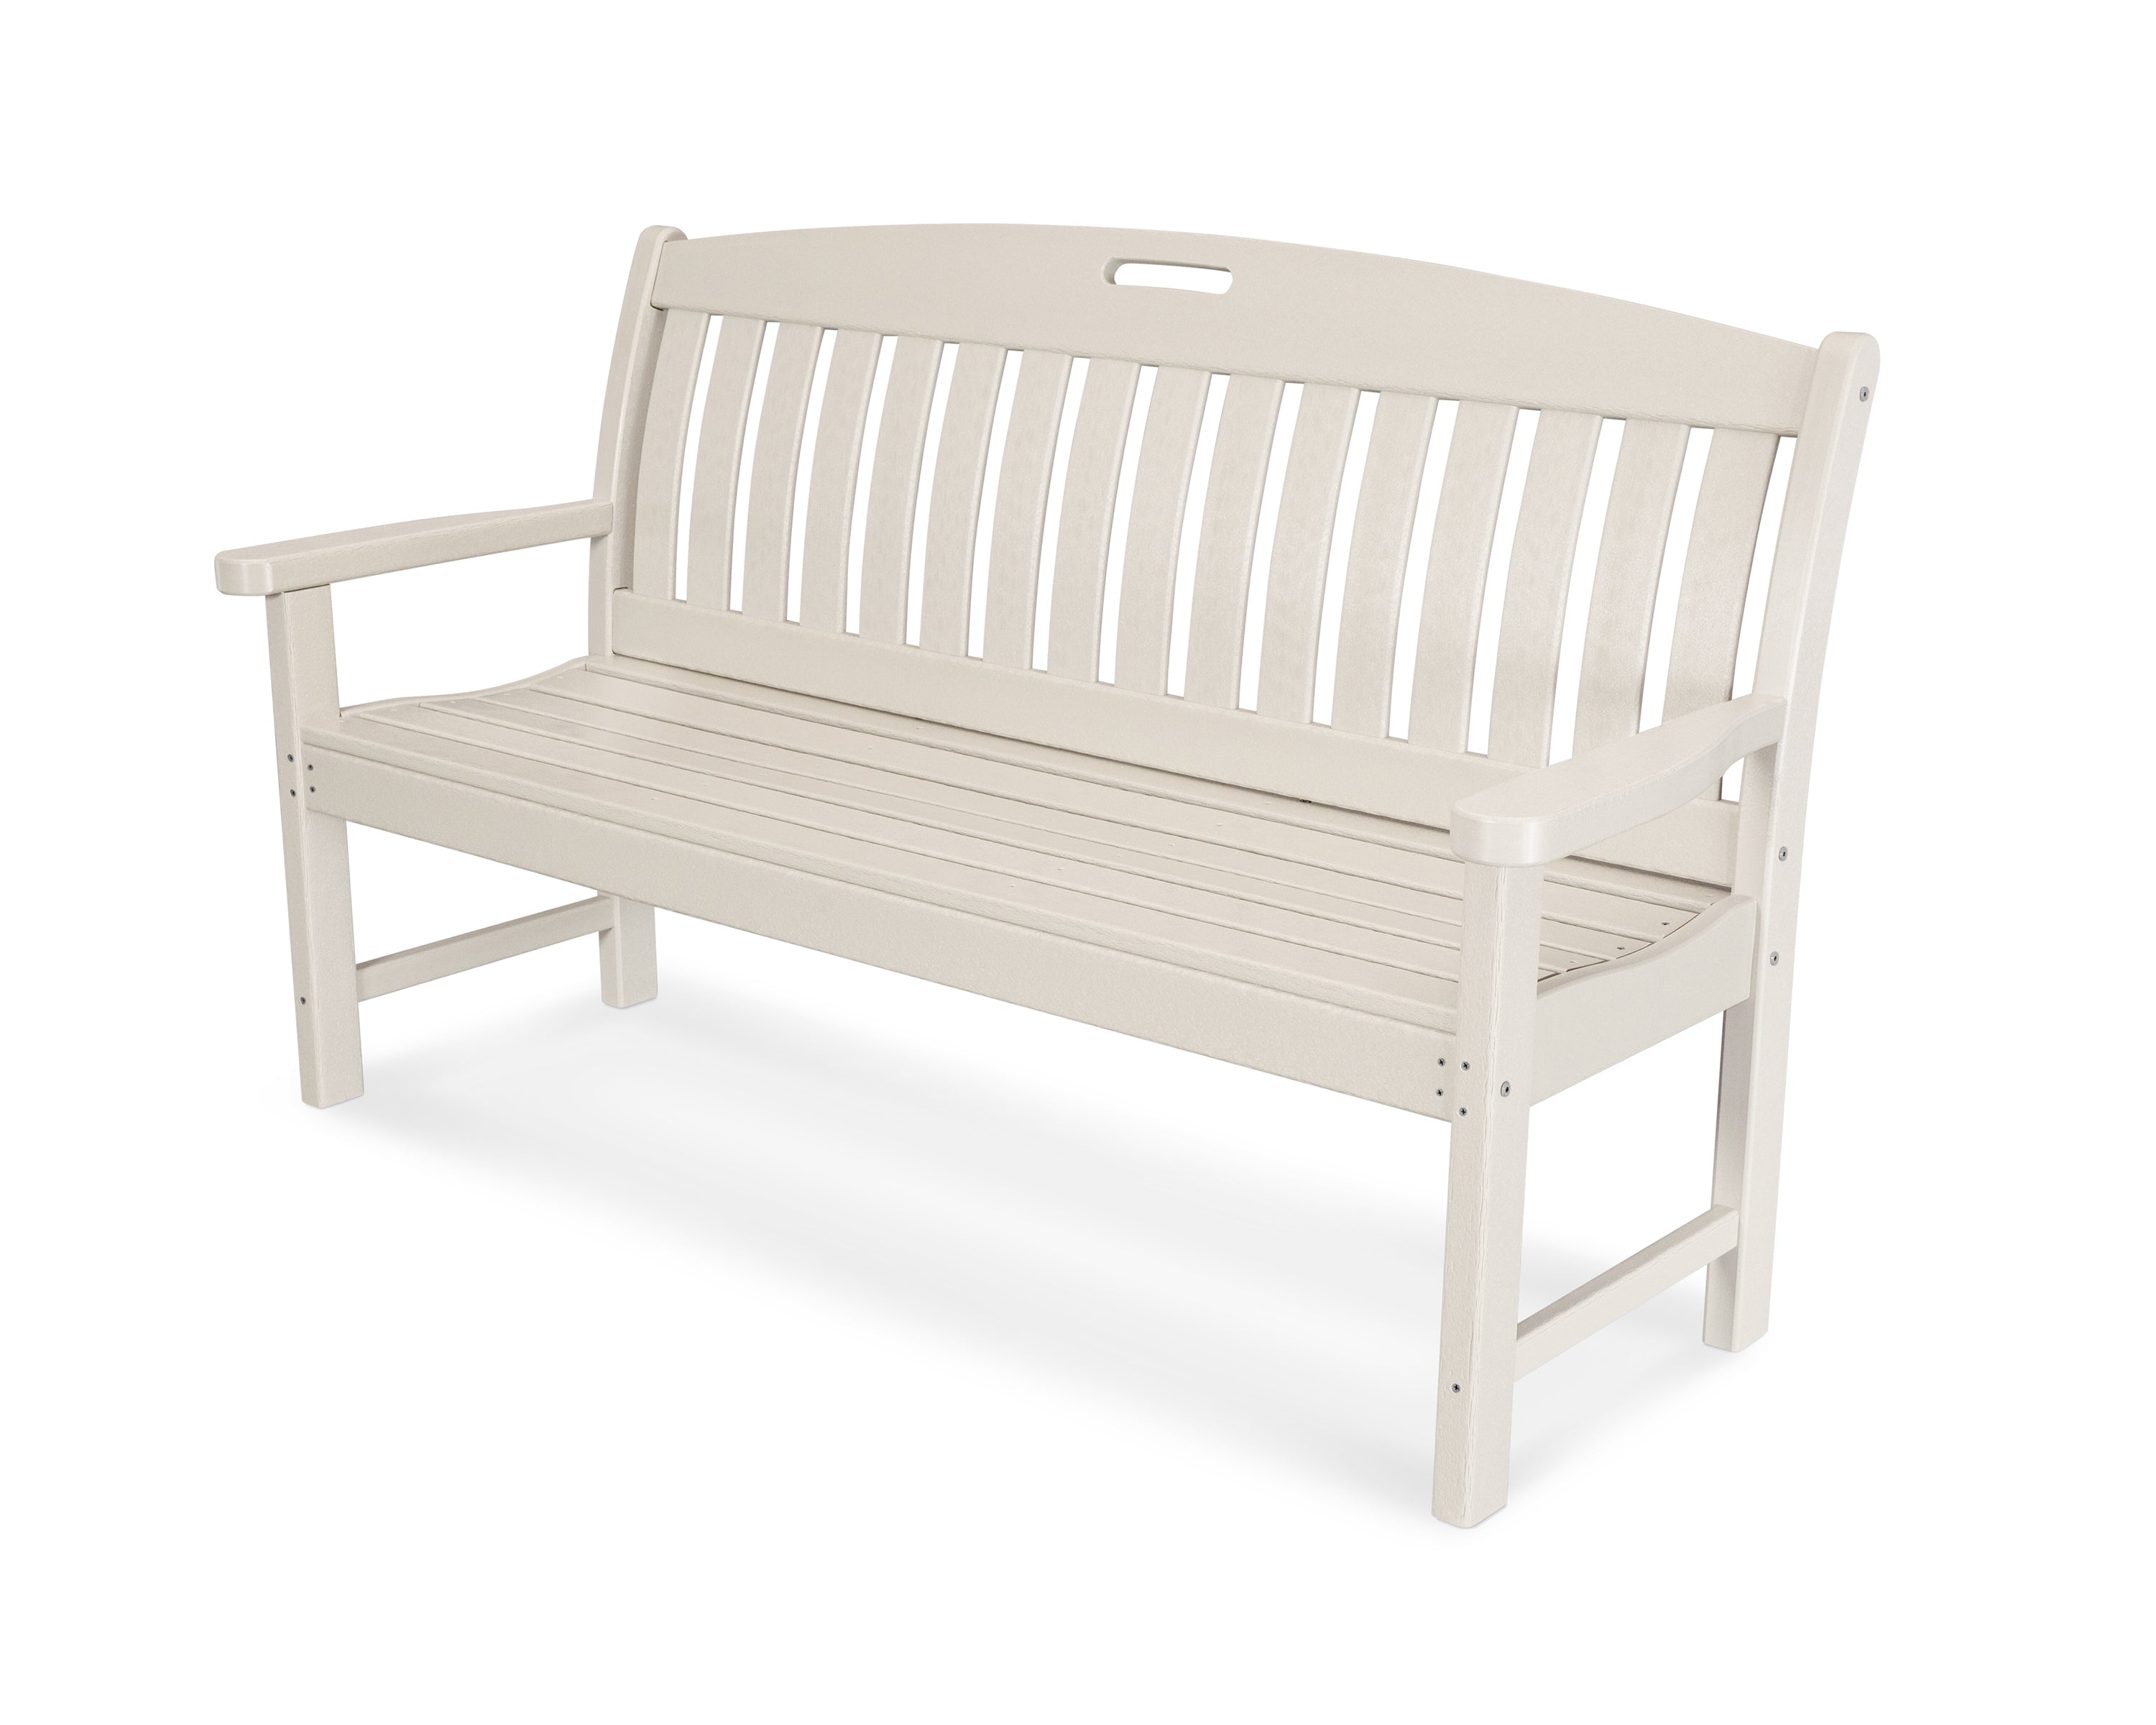 POLYWOOD® Nautical 60" Bench in Sand